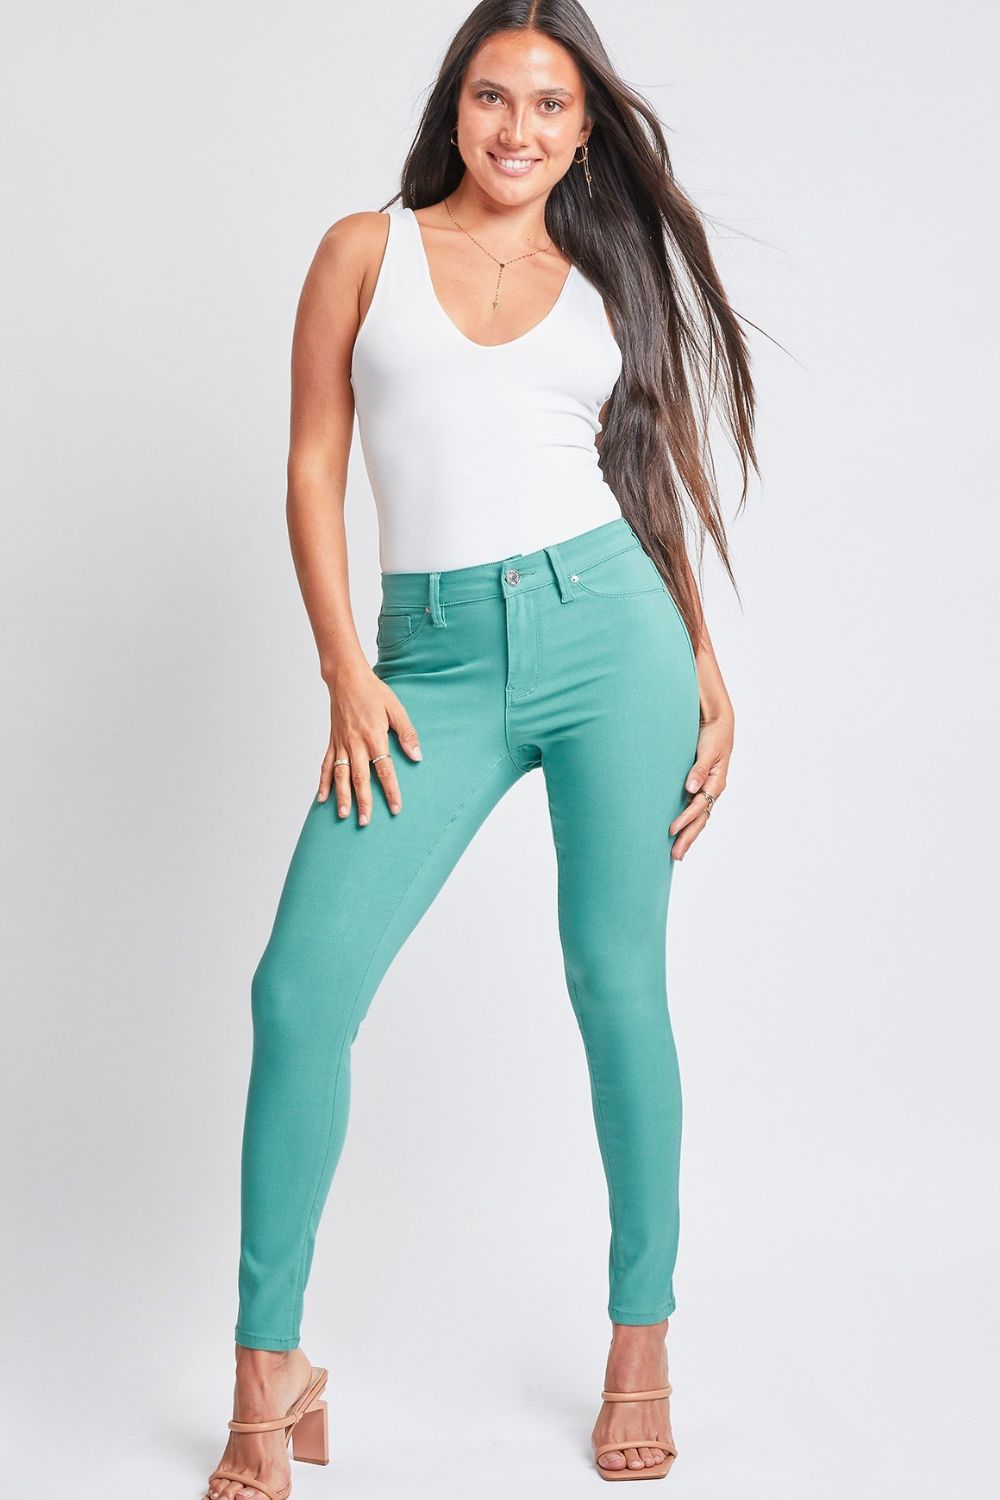 YMI Jeanswear Full Size Hyperstretch Mid-Rise Skinny Pants-Pants-Inspired by Justeen-Women's Clothing Boutique in Chicago, Illinois